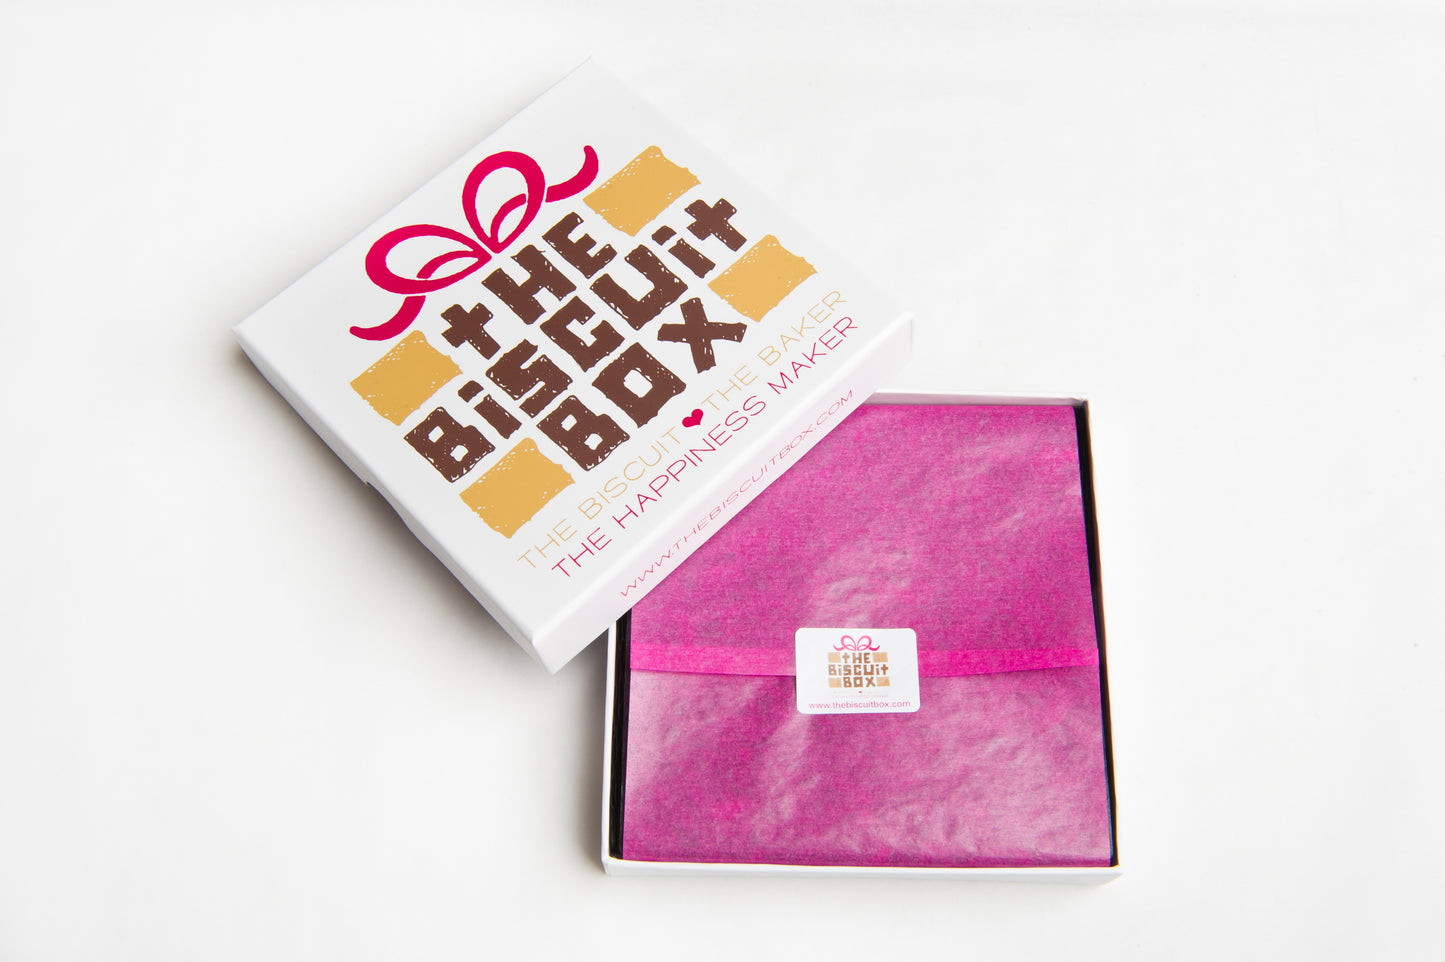 image to show biscuit card packaging. branded lid with pink tissue paper and branded sticker. Small box to fit through letter box so biscuits can be sent by post.